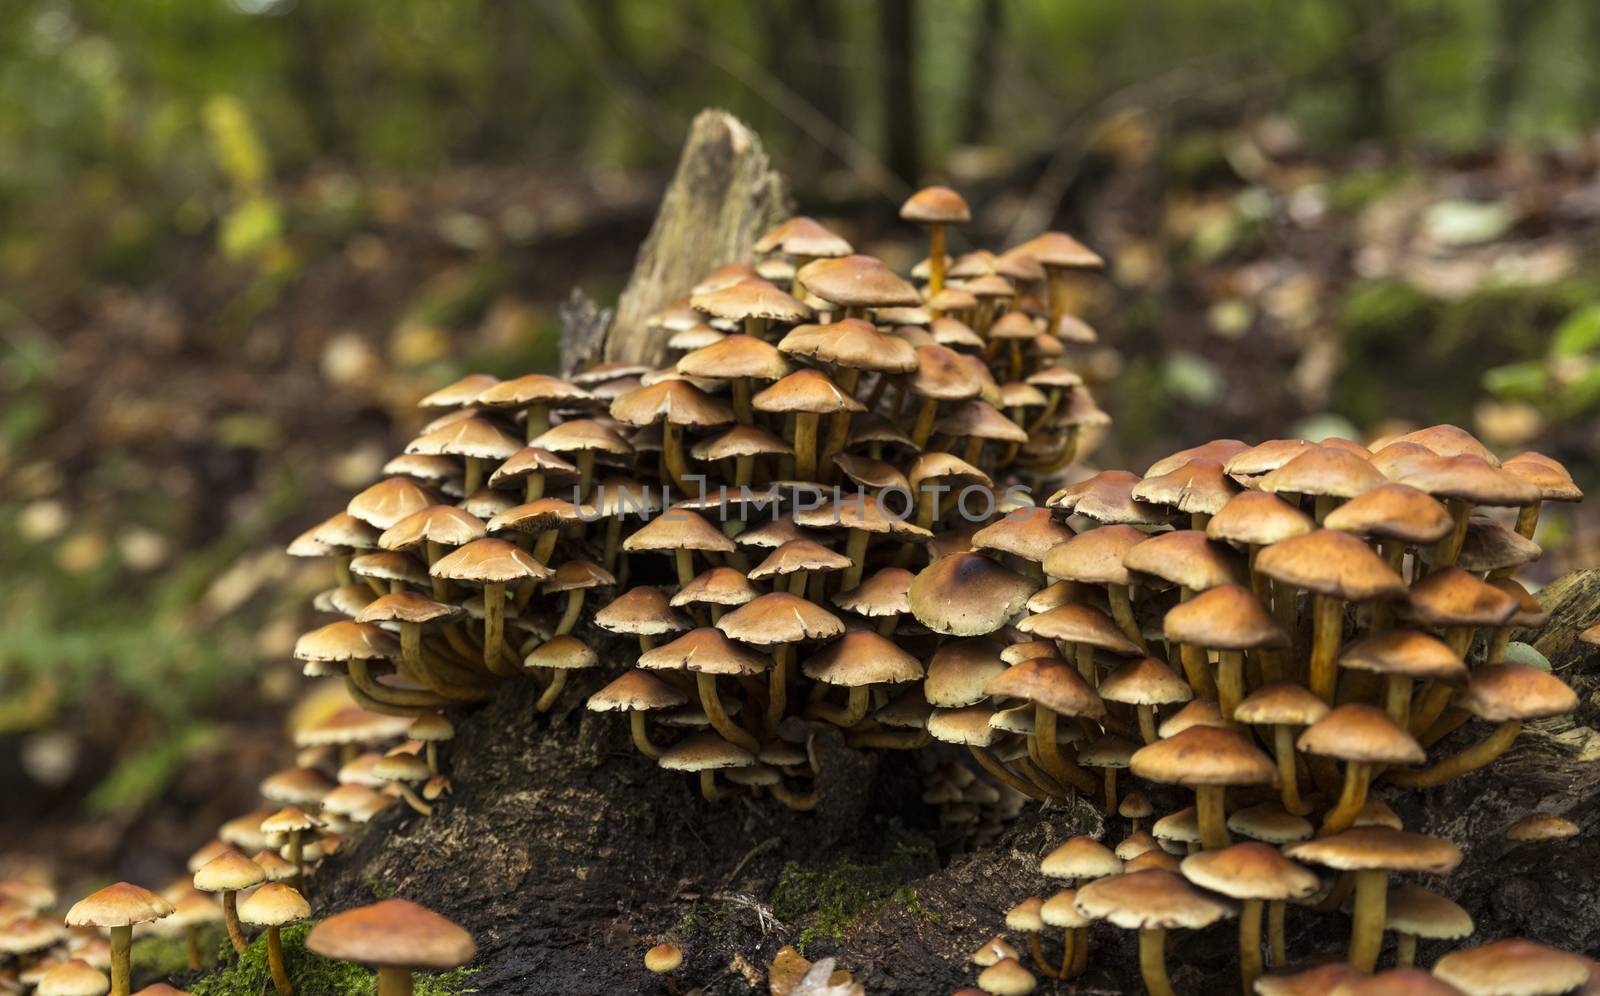 large group of mushrooms on a tree stump in the Veluwe in autumn with green moss in between